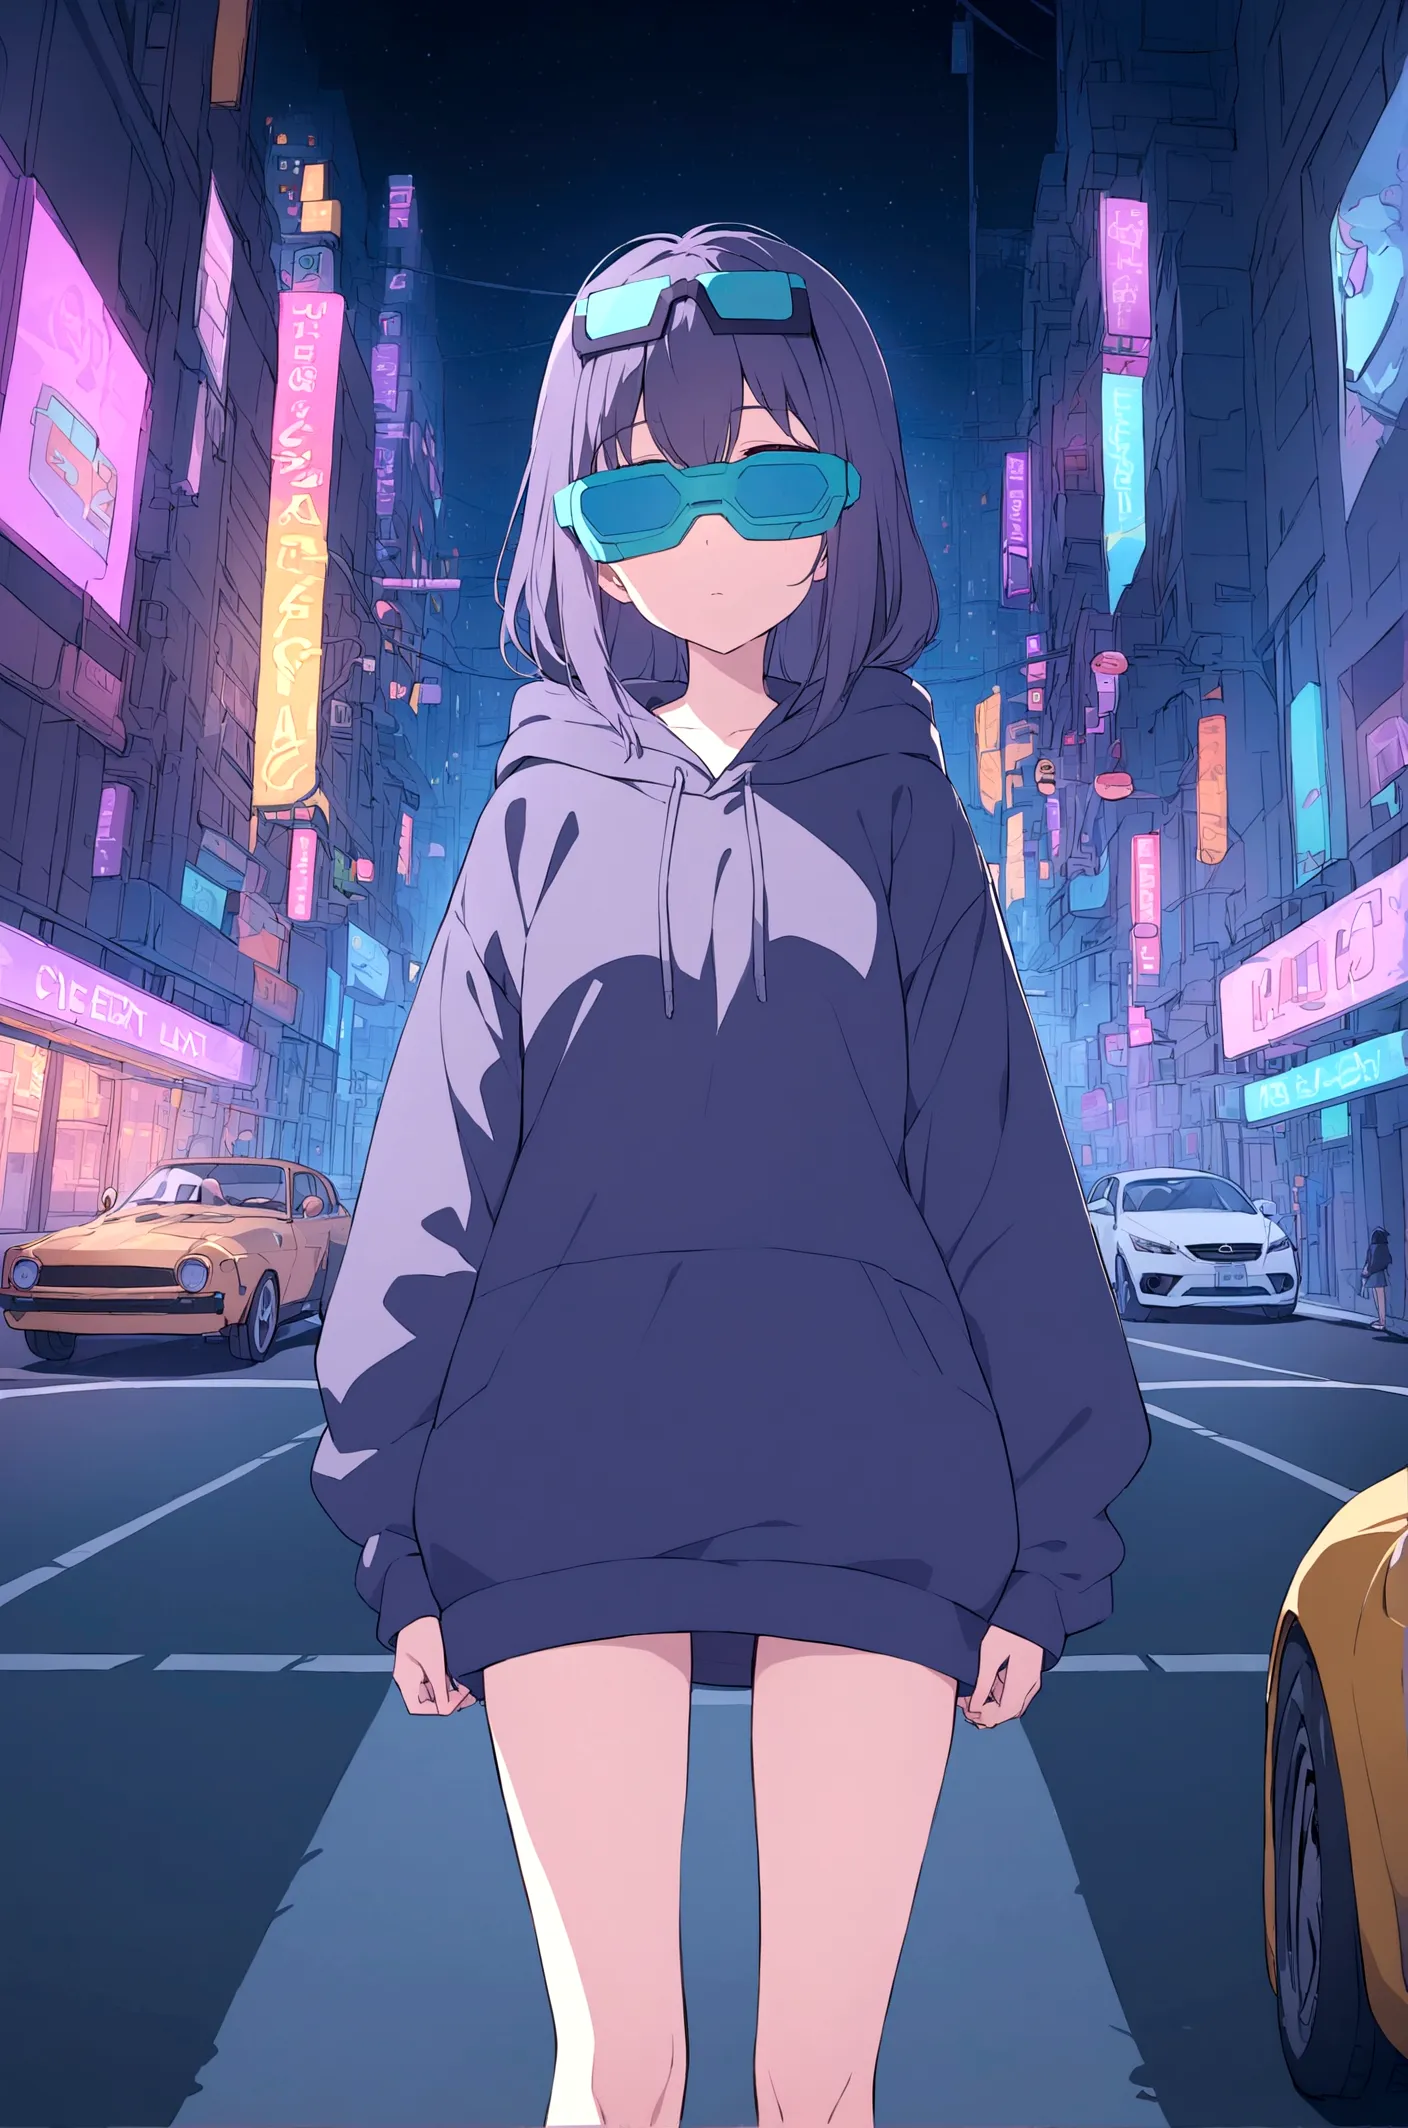 Slim girl standing at the middle of road, wearing black purple hoodie, wearing cyber glasses, neon city, at night, cars